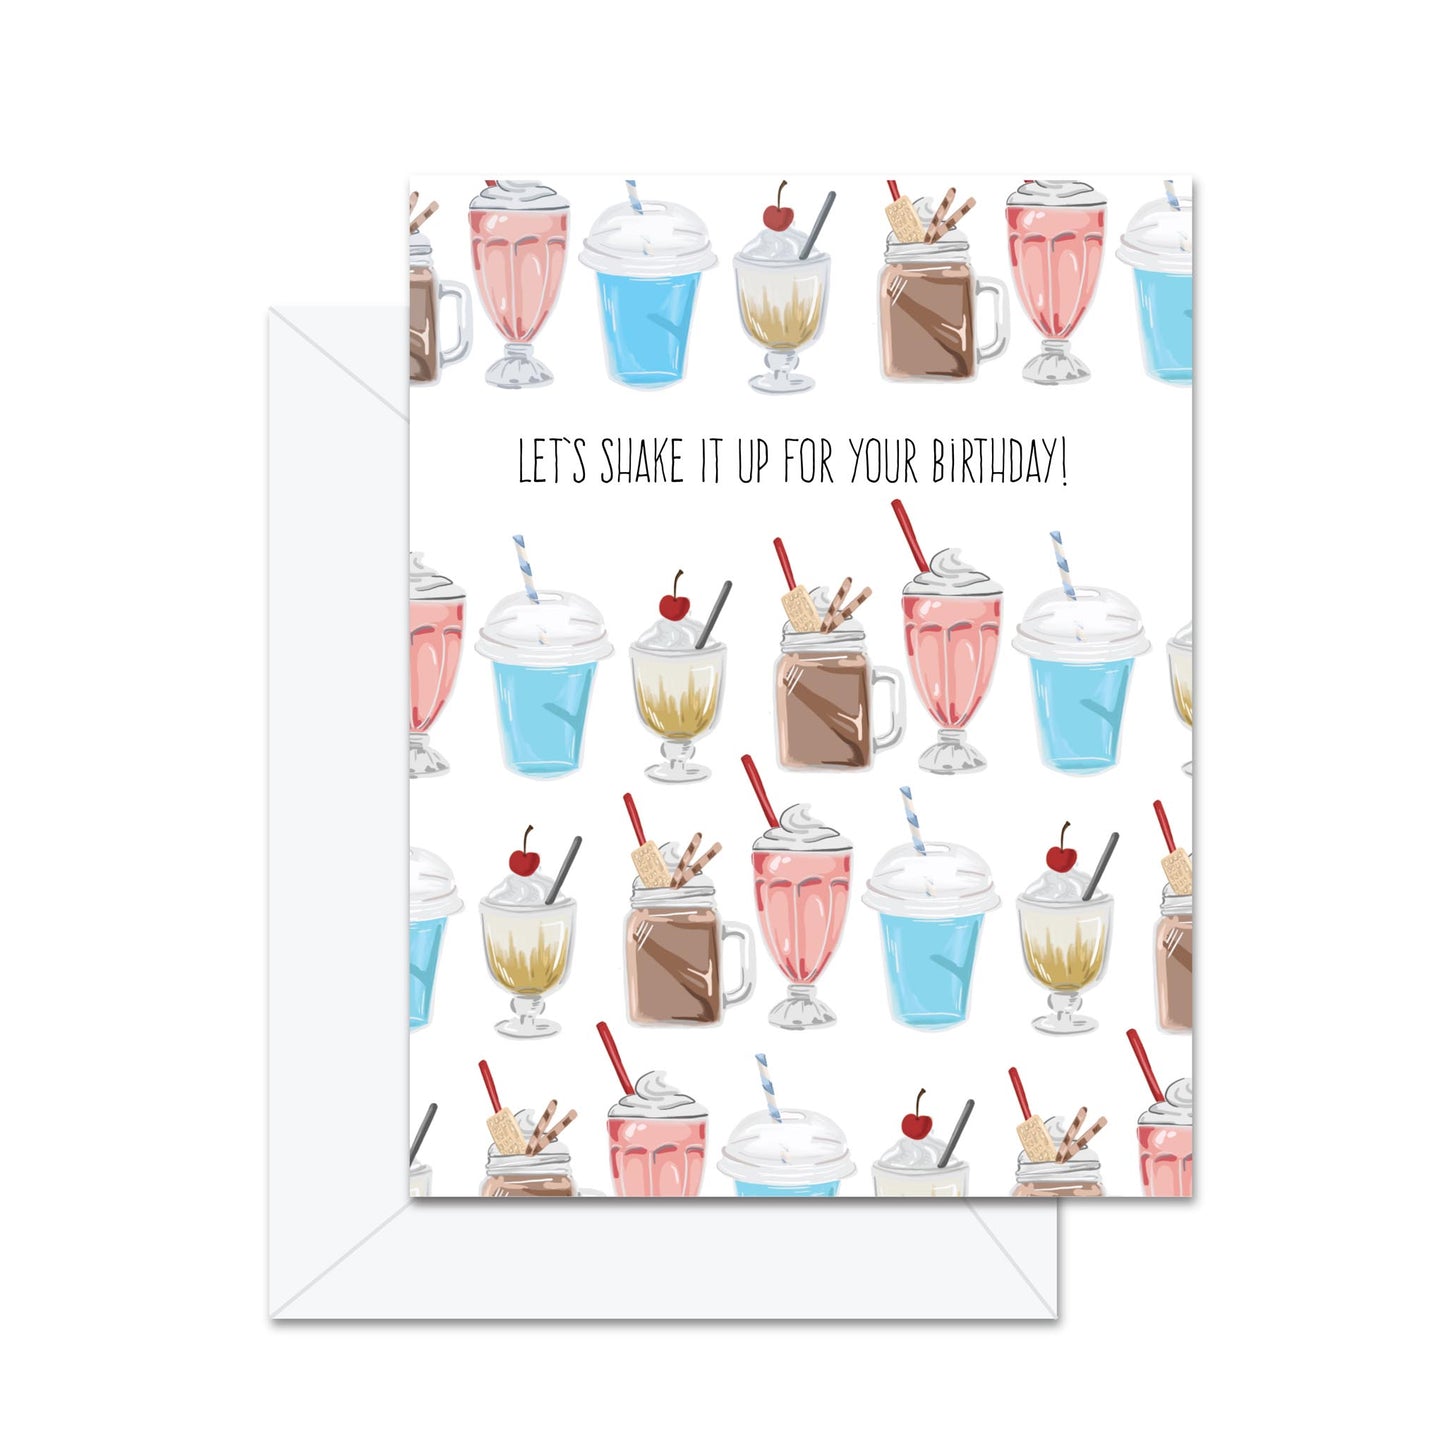 Let's Shake It Up For Your Birthday! - Greeting Card